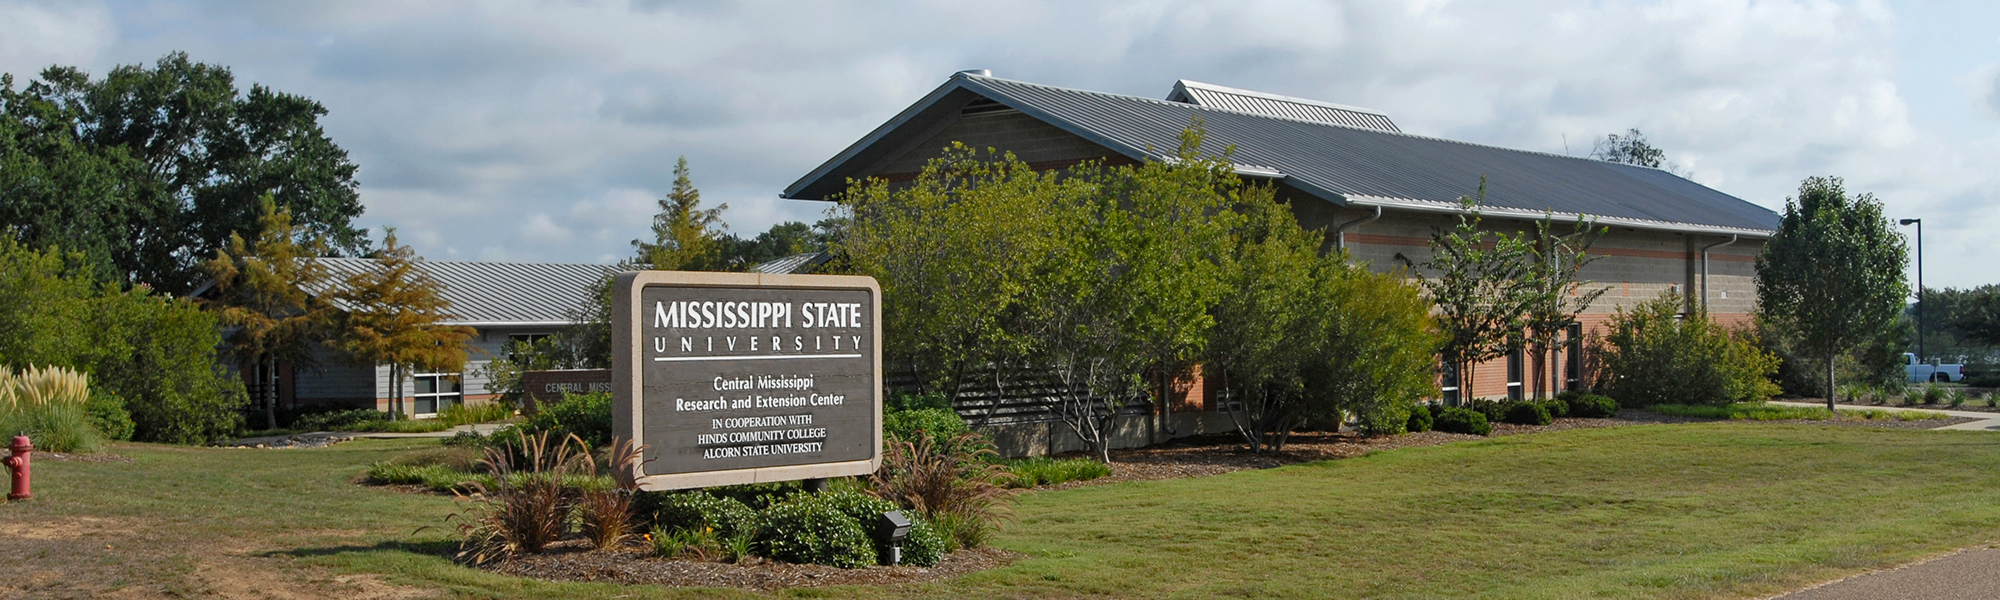 Central Mississippi Research and Extension Center